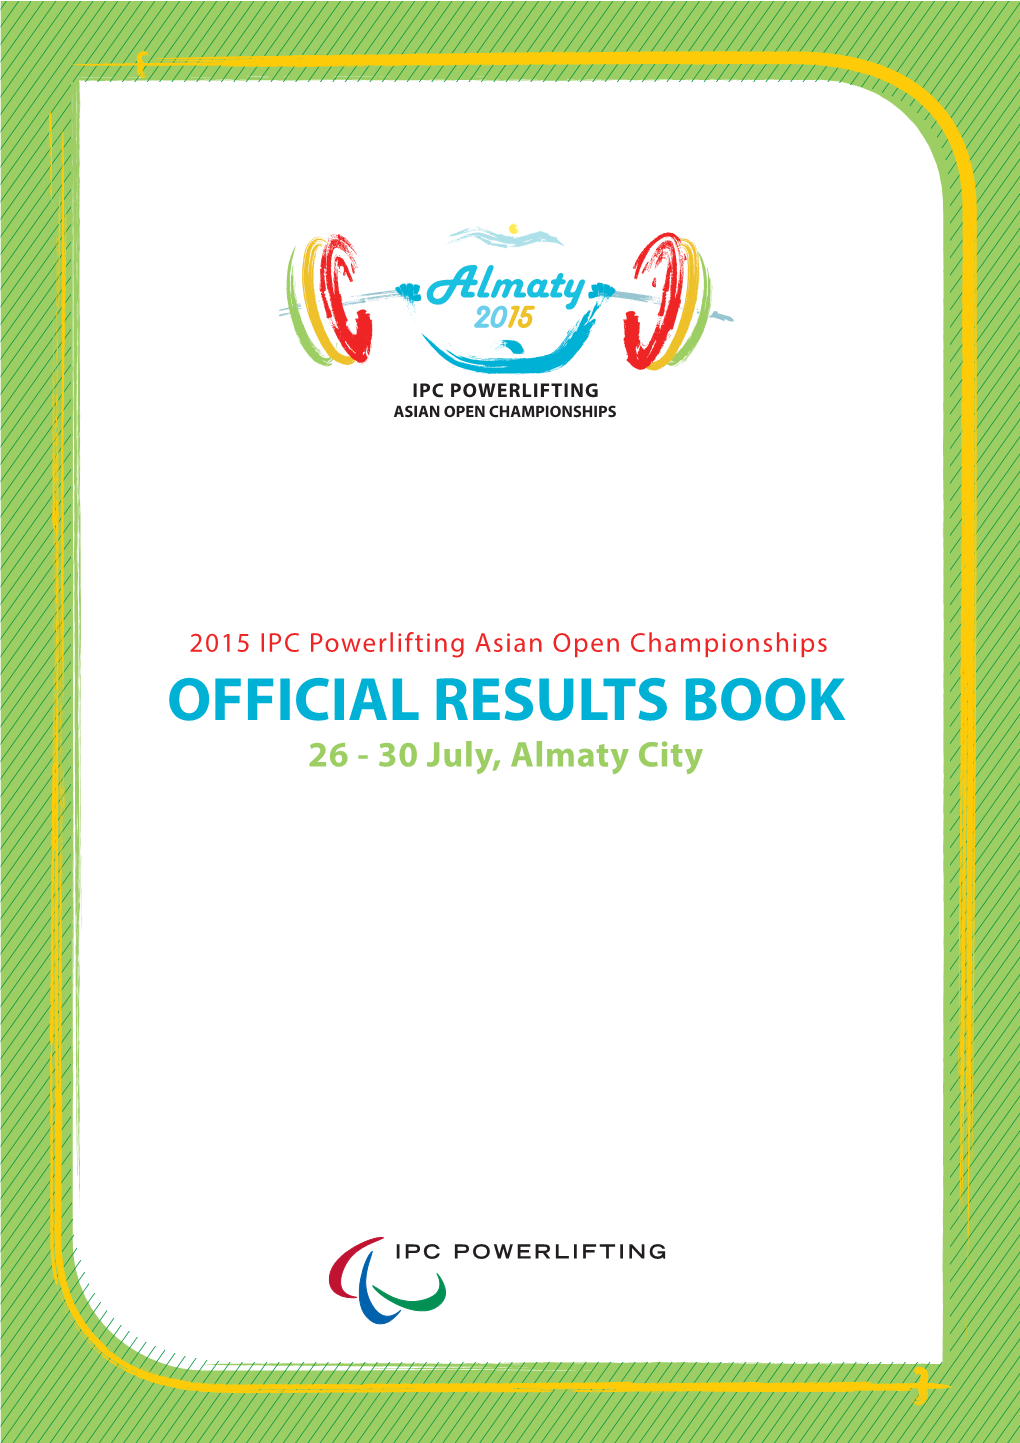 2015 IPC Powerlifting Asian Open Championships OFFICIAL RESULTS BOOK 26 - 30 July, Almaty City BALUAN SHOLAK SPORTS PALACE POWERLIFTING